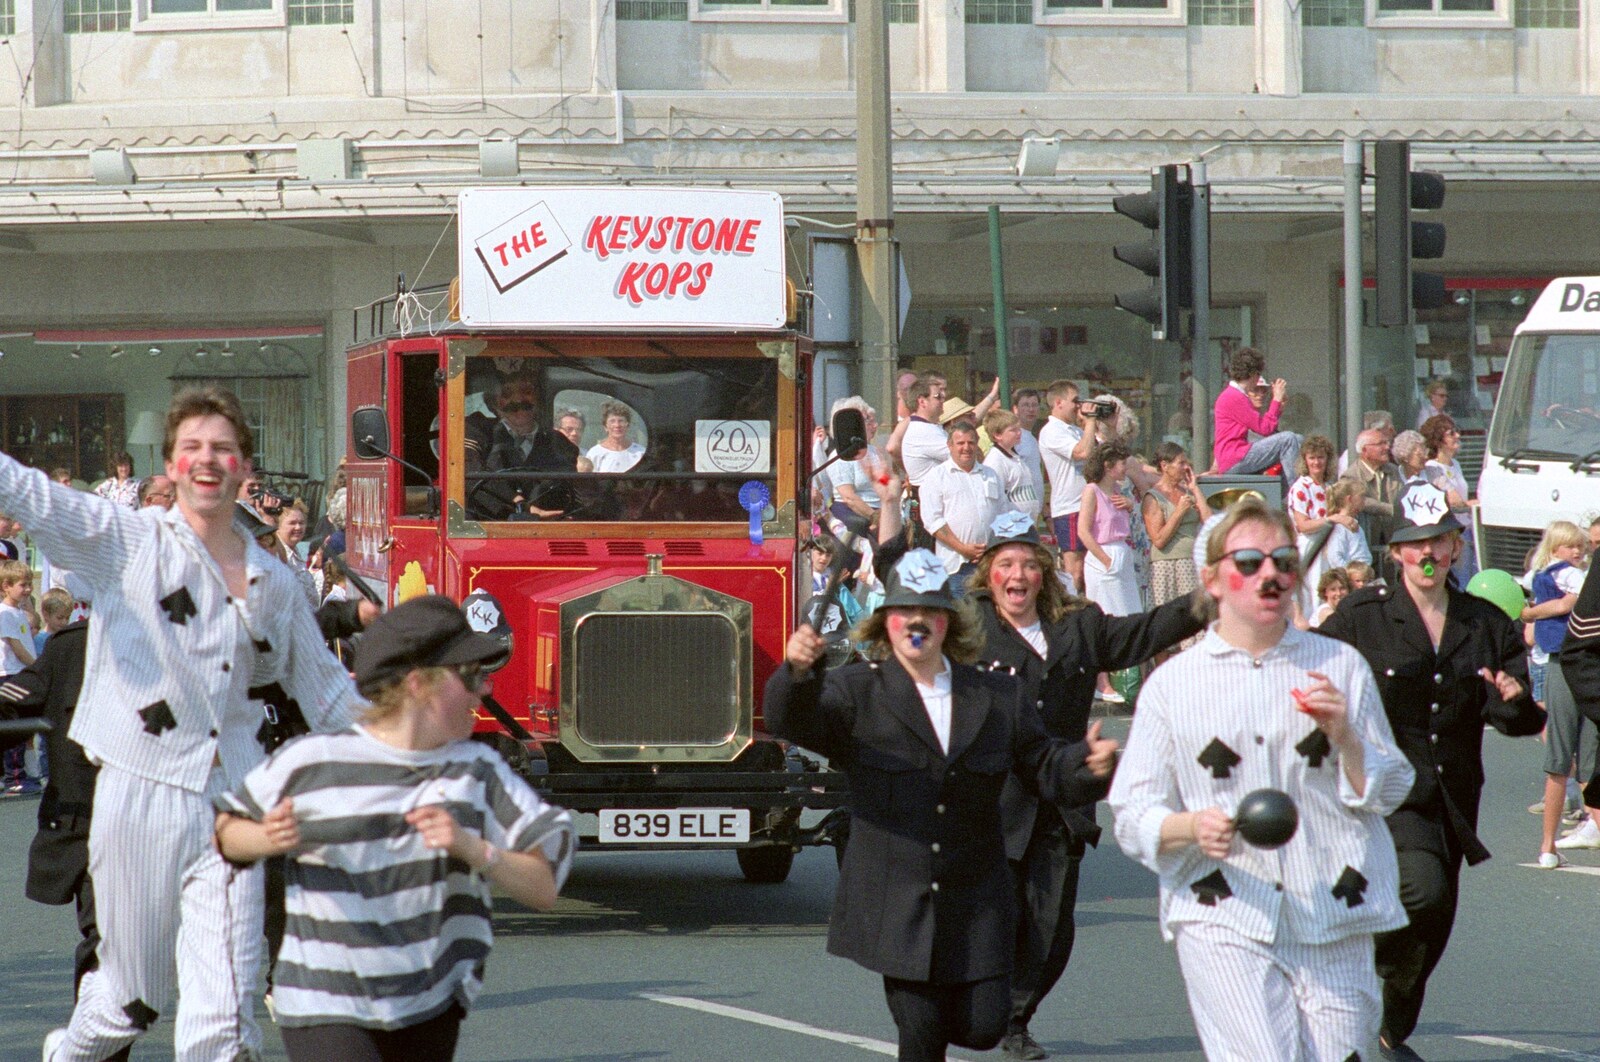 A Keystone Kops float from Chantal and Andy's Wedding, and the Lord Mayor's Parade, Plymouth - 20th May 1987